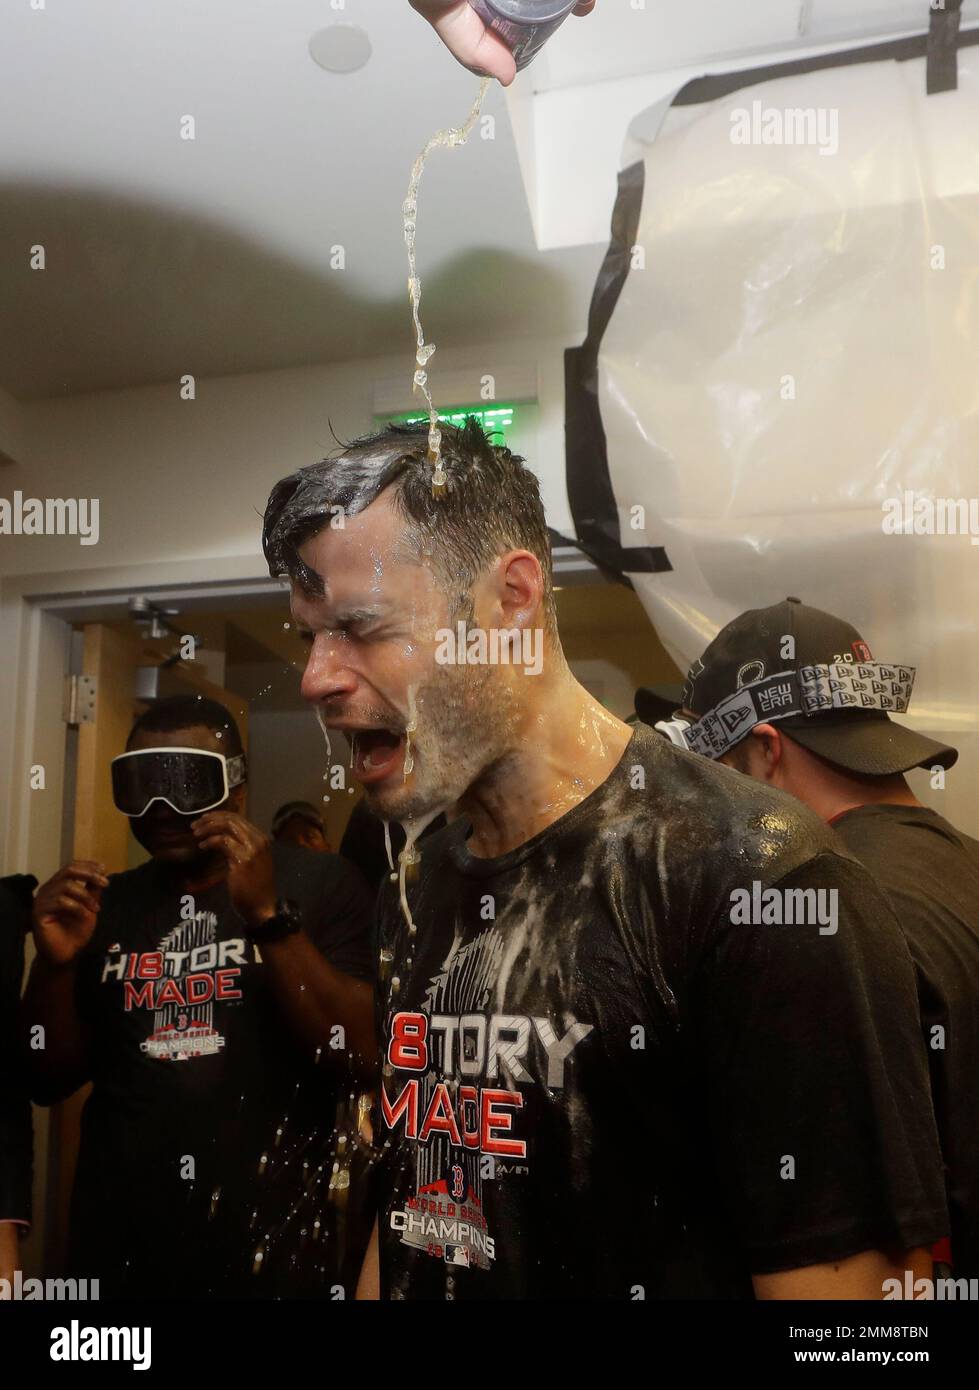 CORRECTS TO THE BOSTON RED SOX JOE KELLY FROM THE BOSTON RED SOX CHRIS SALE  - The Boston Red Sox Joe Kelly celebrates in the clubhouse after Game 5 of  baseball's World